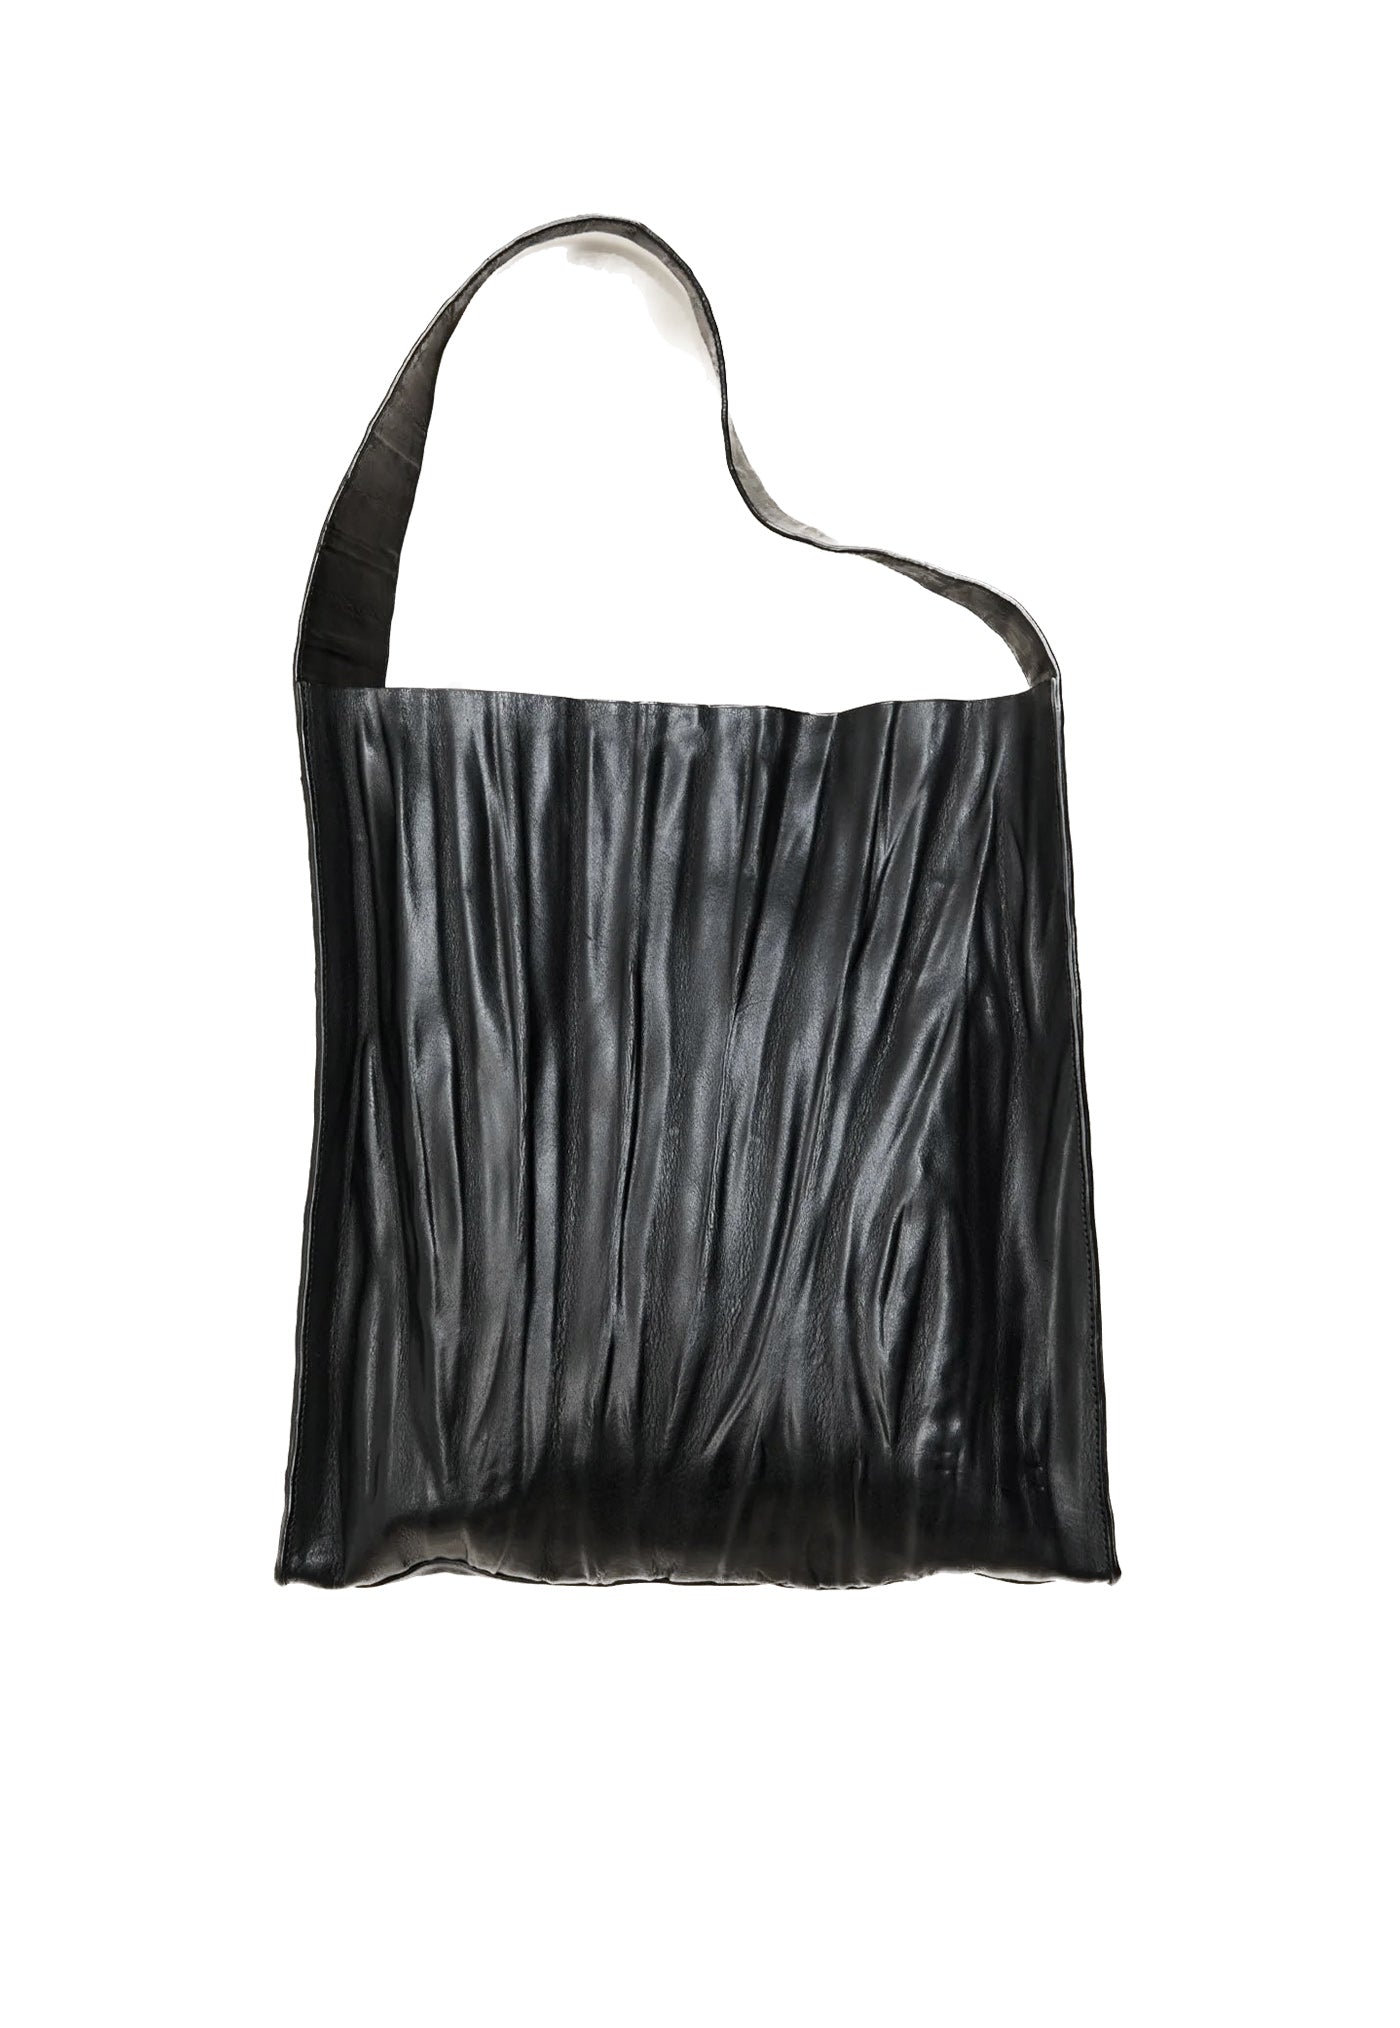 Paper Tote -  Black sold by Angel Divine